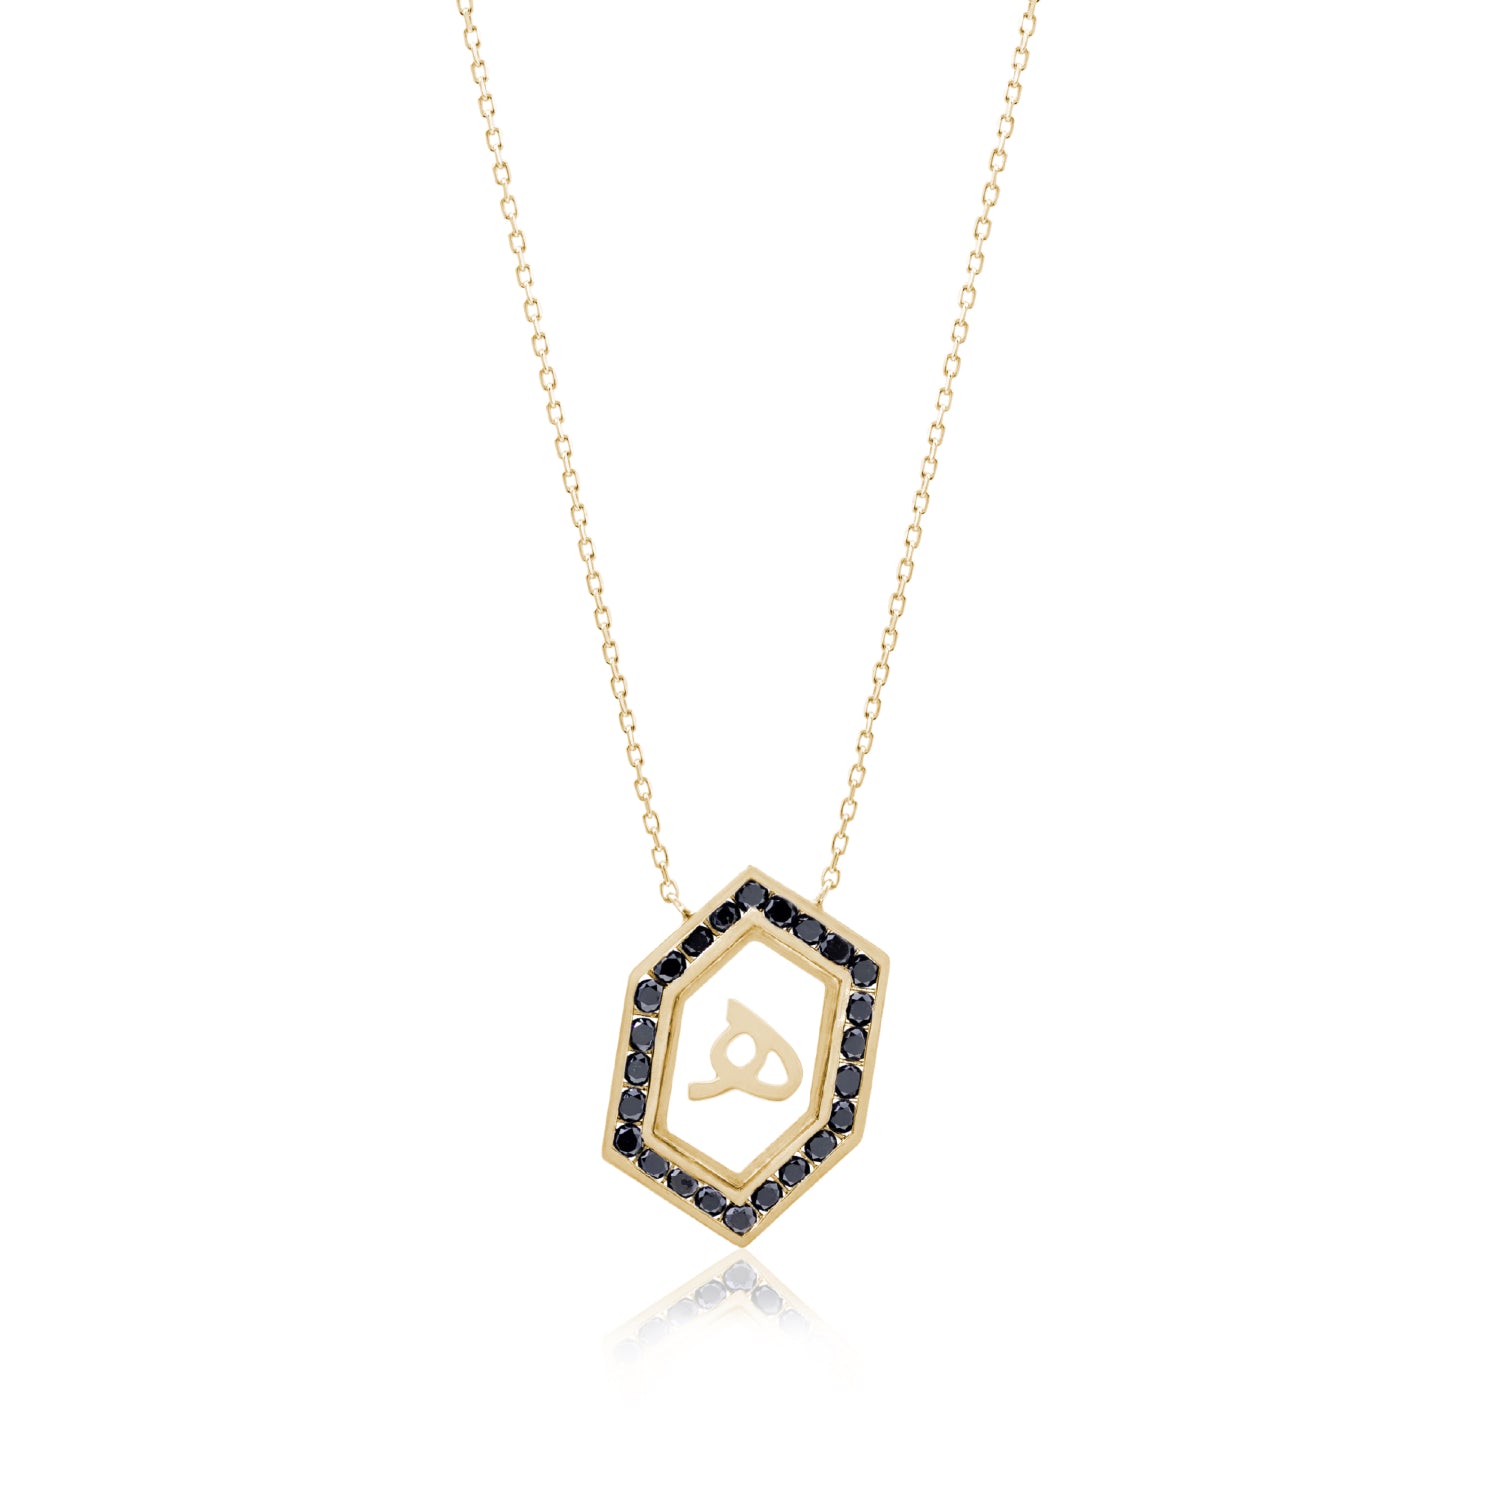 Qamoos 1.0 Letter هـ Black Diamond Necklace in Yellow Gold